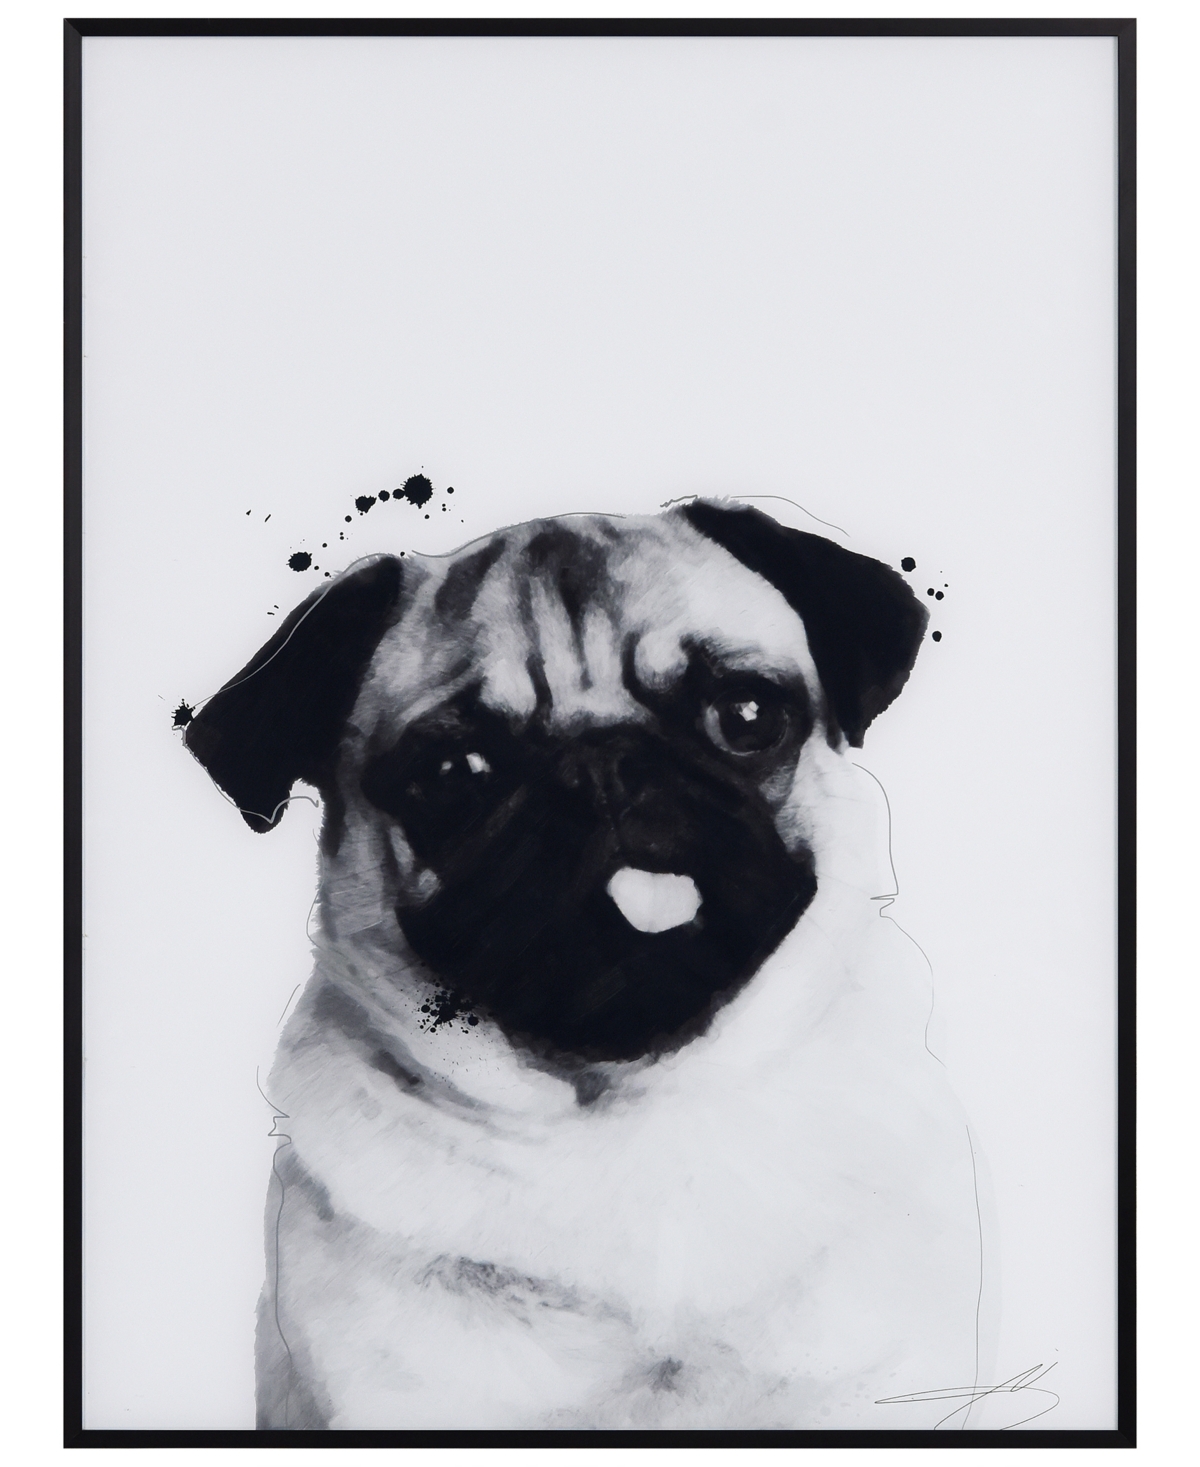 Empire Art Direct "pug" Pet Paintings On Printed Glass Encased With A Black Anodized Frame, 24" X 18" X 1" In Black And White